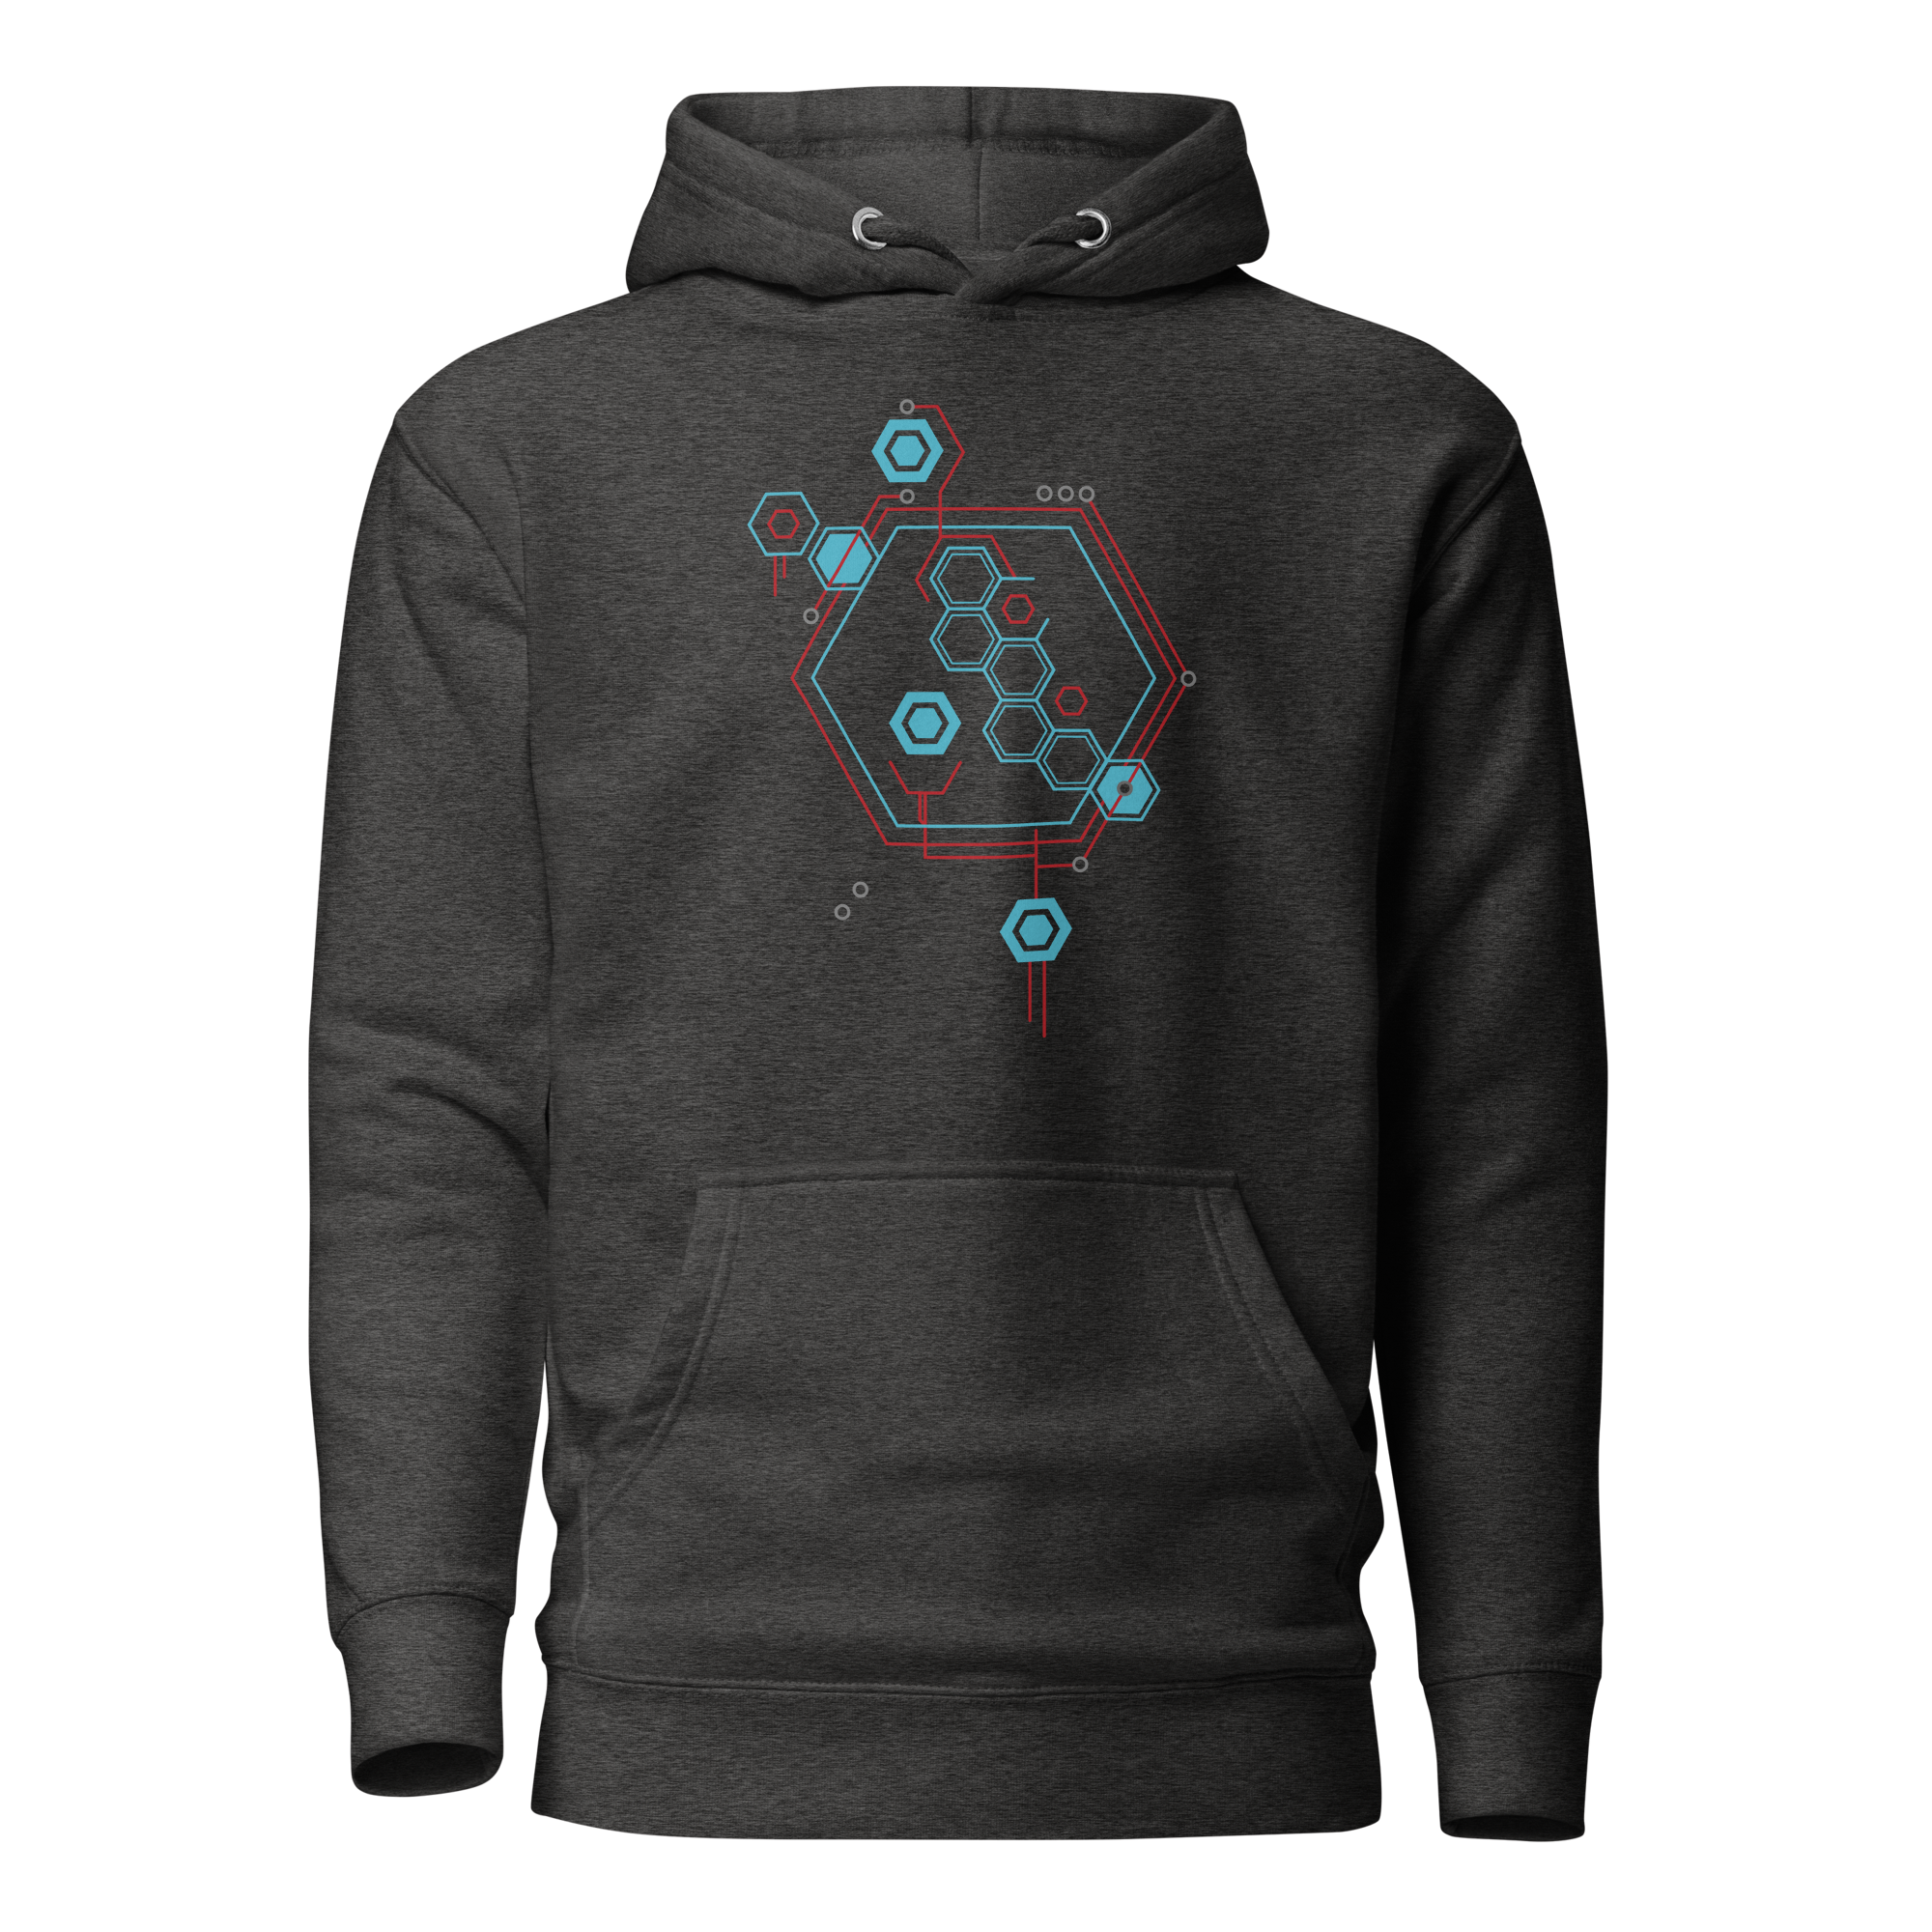 Charcoal Heather Roots Graphic Hoodie Front View